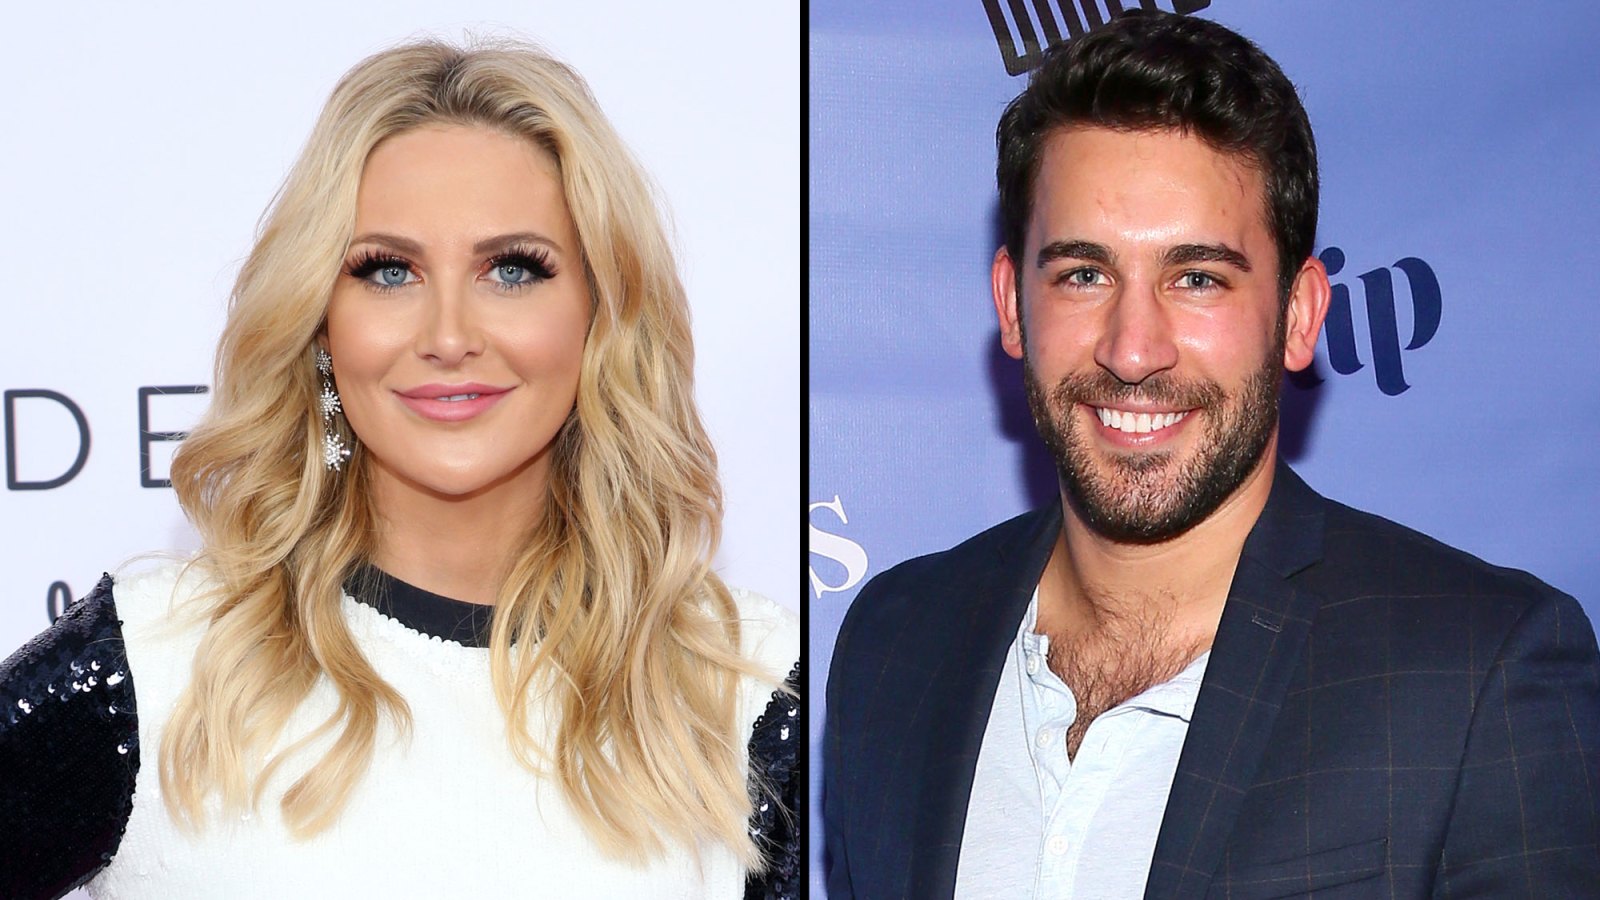 Stephanie Pratt Says She and Derek Peth Are Over 'Hopefully He'll Be Single in a Year'